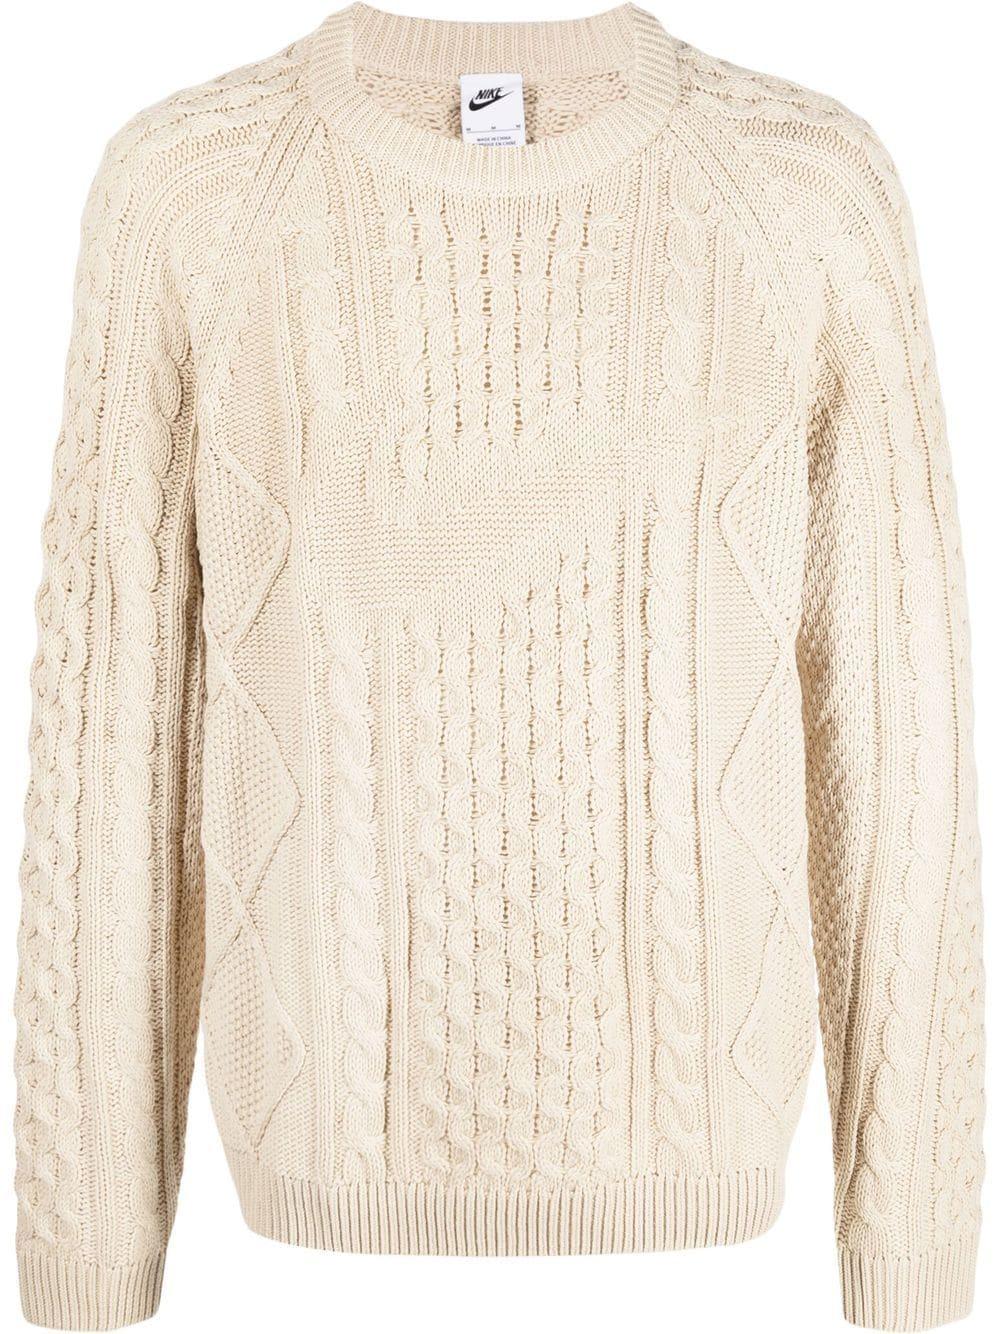 Nike Swoosh Cable-knit Sweater in Natural for Men | Lyst